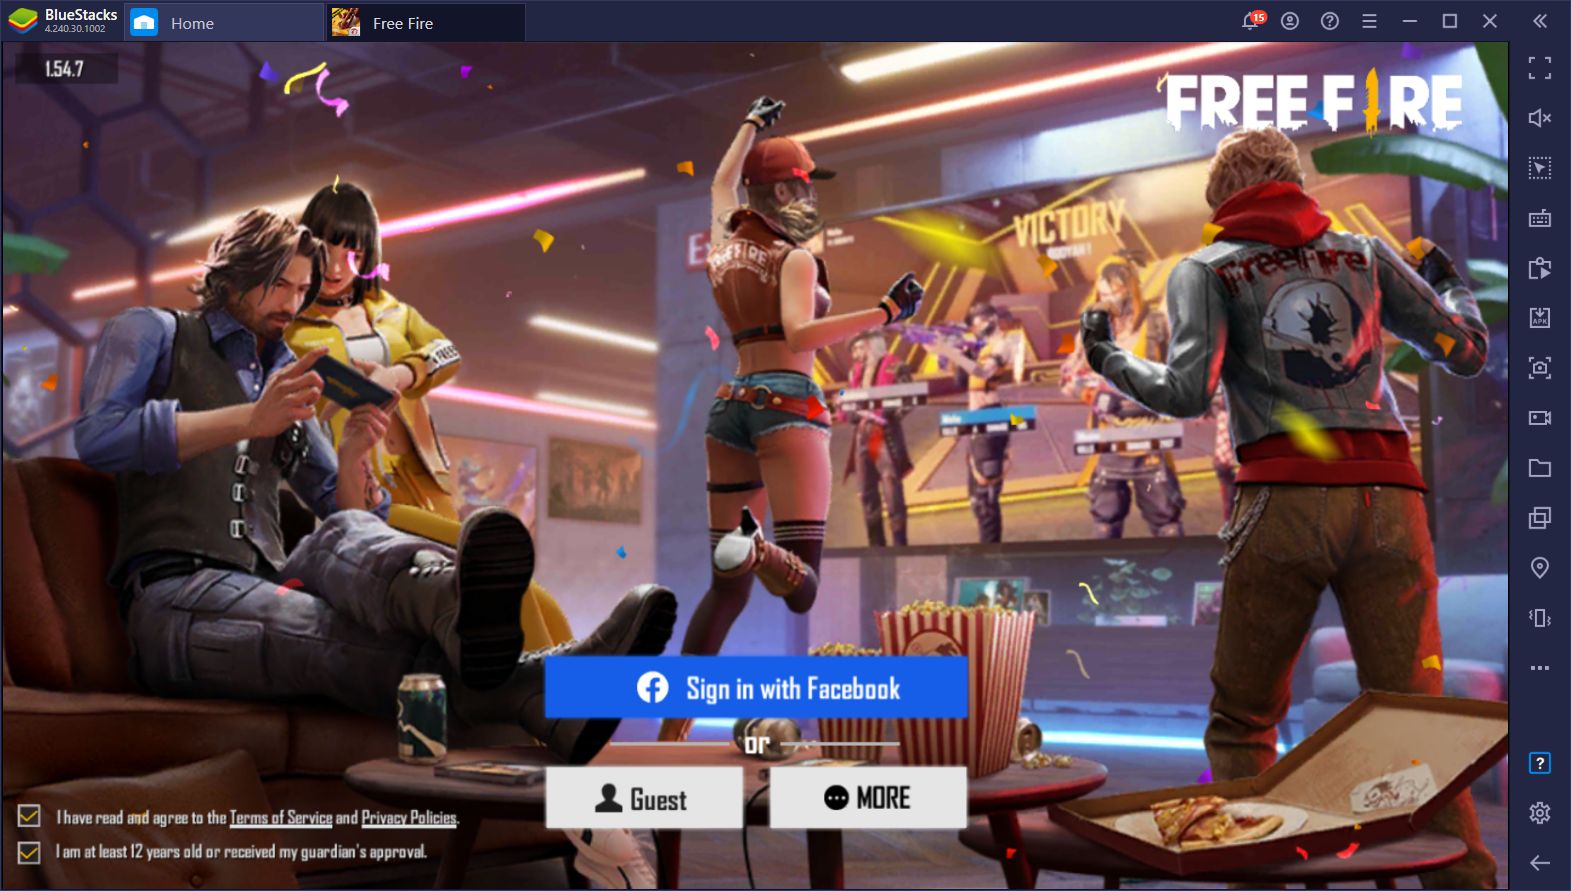 Garena Free Fire Oblivion Pass Brings New Costumes And Rewards And Lots Of Unique Events Bluestacks